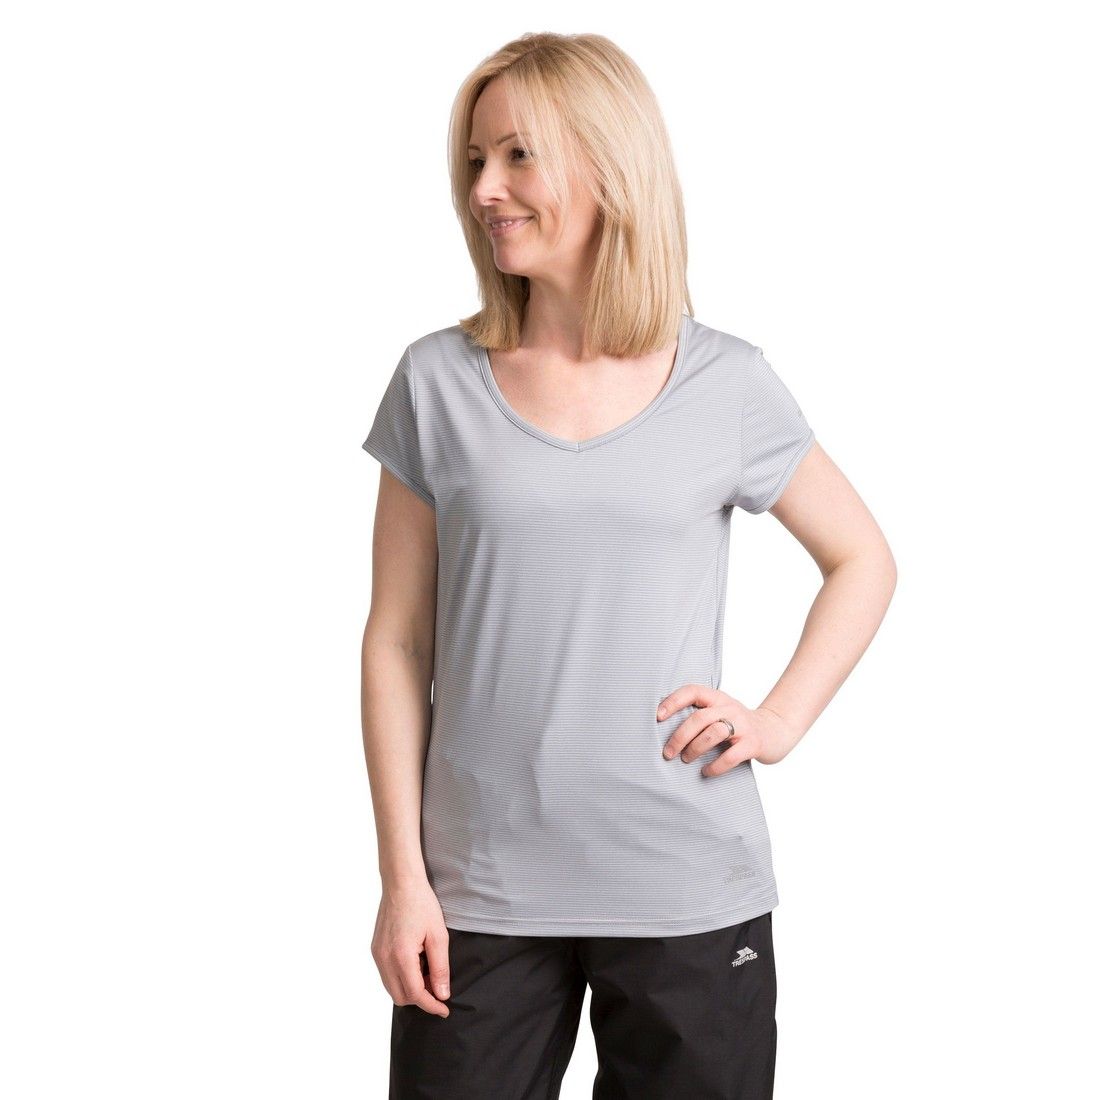 Striped marl stretch fabric. Back neck binding. V-neck. Short sleeves. Coverstitching. Duoskin. Quick dry. 4 way stretch. 200gsm. 90% Polyester, 10% Elastane. Trespass Womens Chest Sizing (approx): XS/8 - 32in/81cm, S/10 - 34in/86cm, M/12 - 36in/91.4cm, L/14 - 38in/96.5cm, XL/16 - 40in/101.5cm, XXL/18 - 42in/106.5cm.